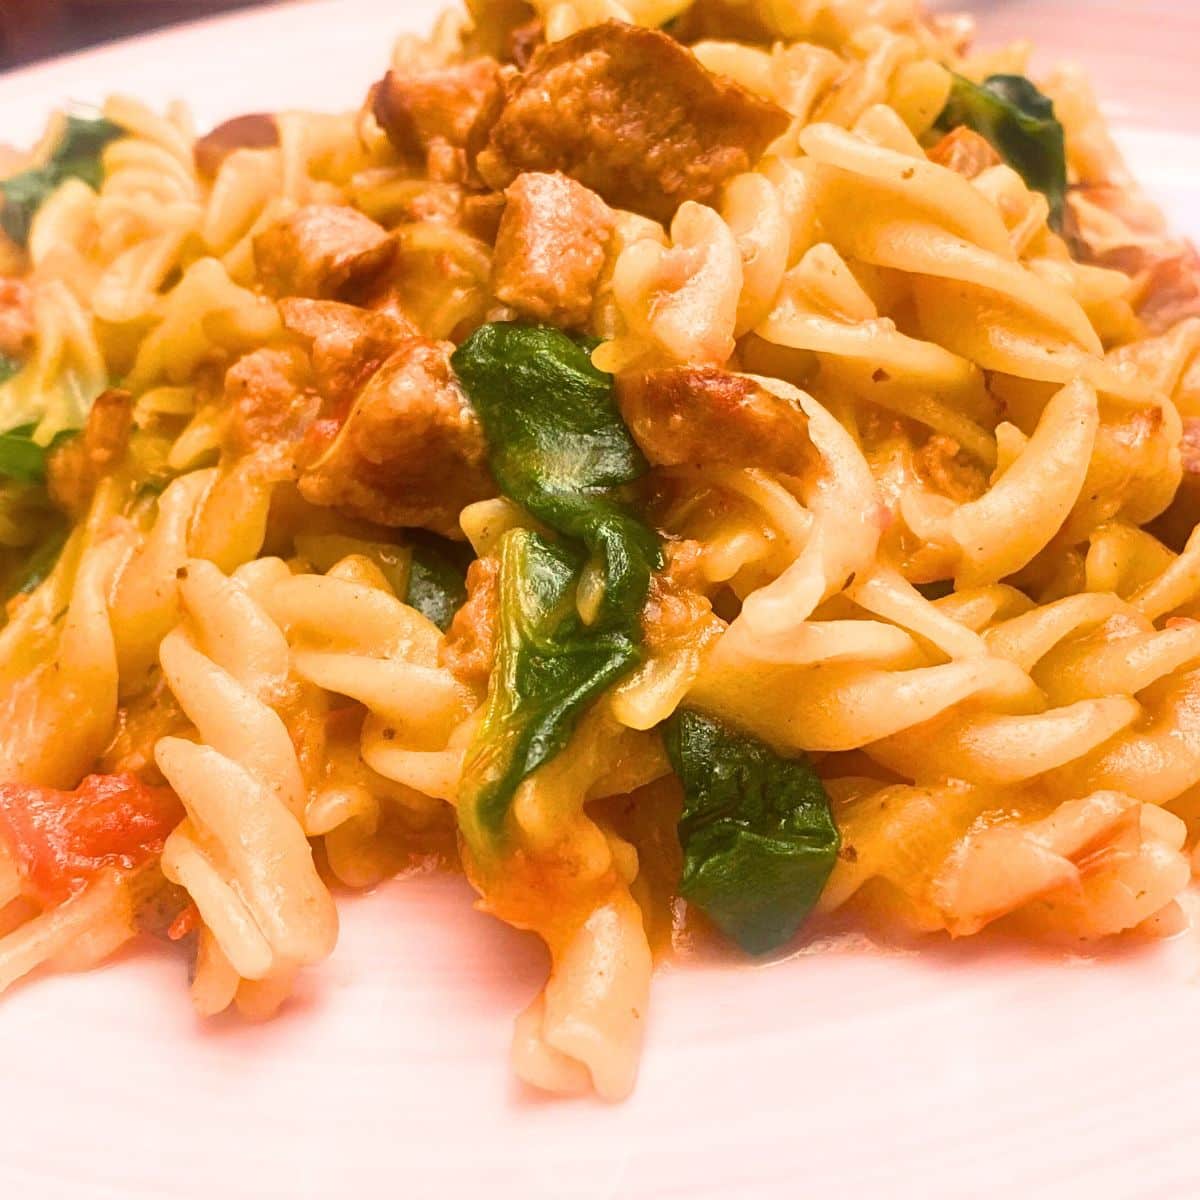 A close up of spinach, sausage and pasta meal.